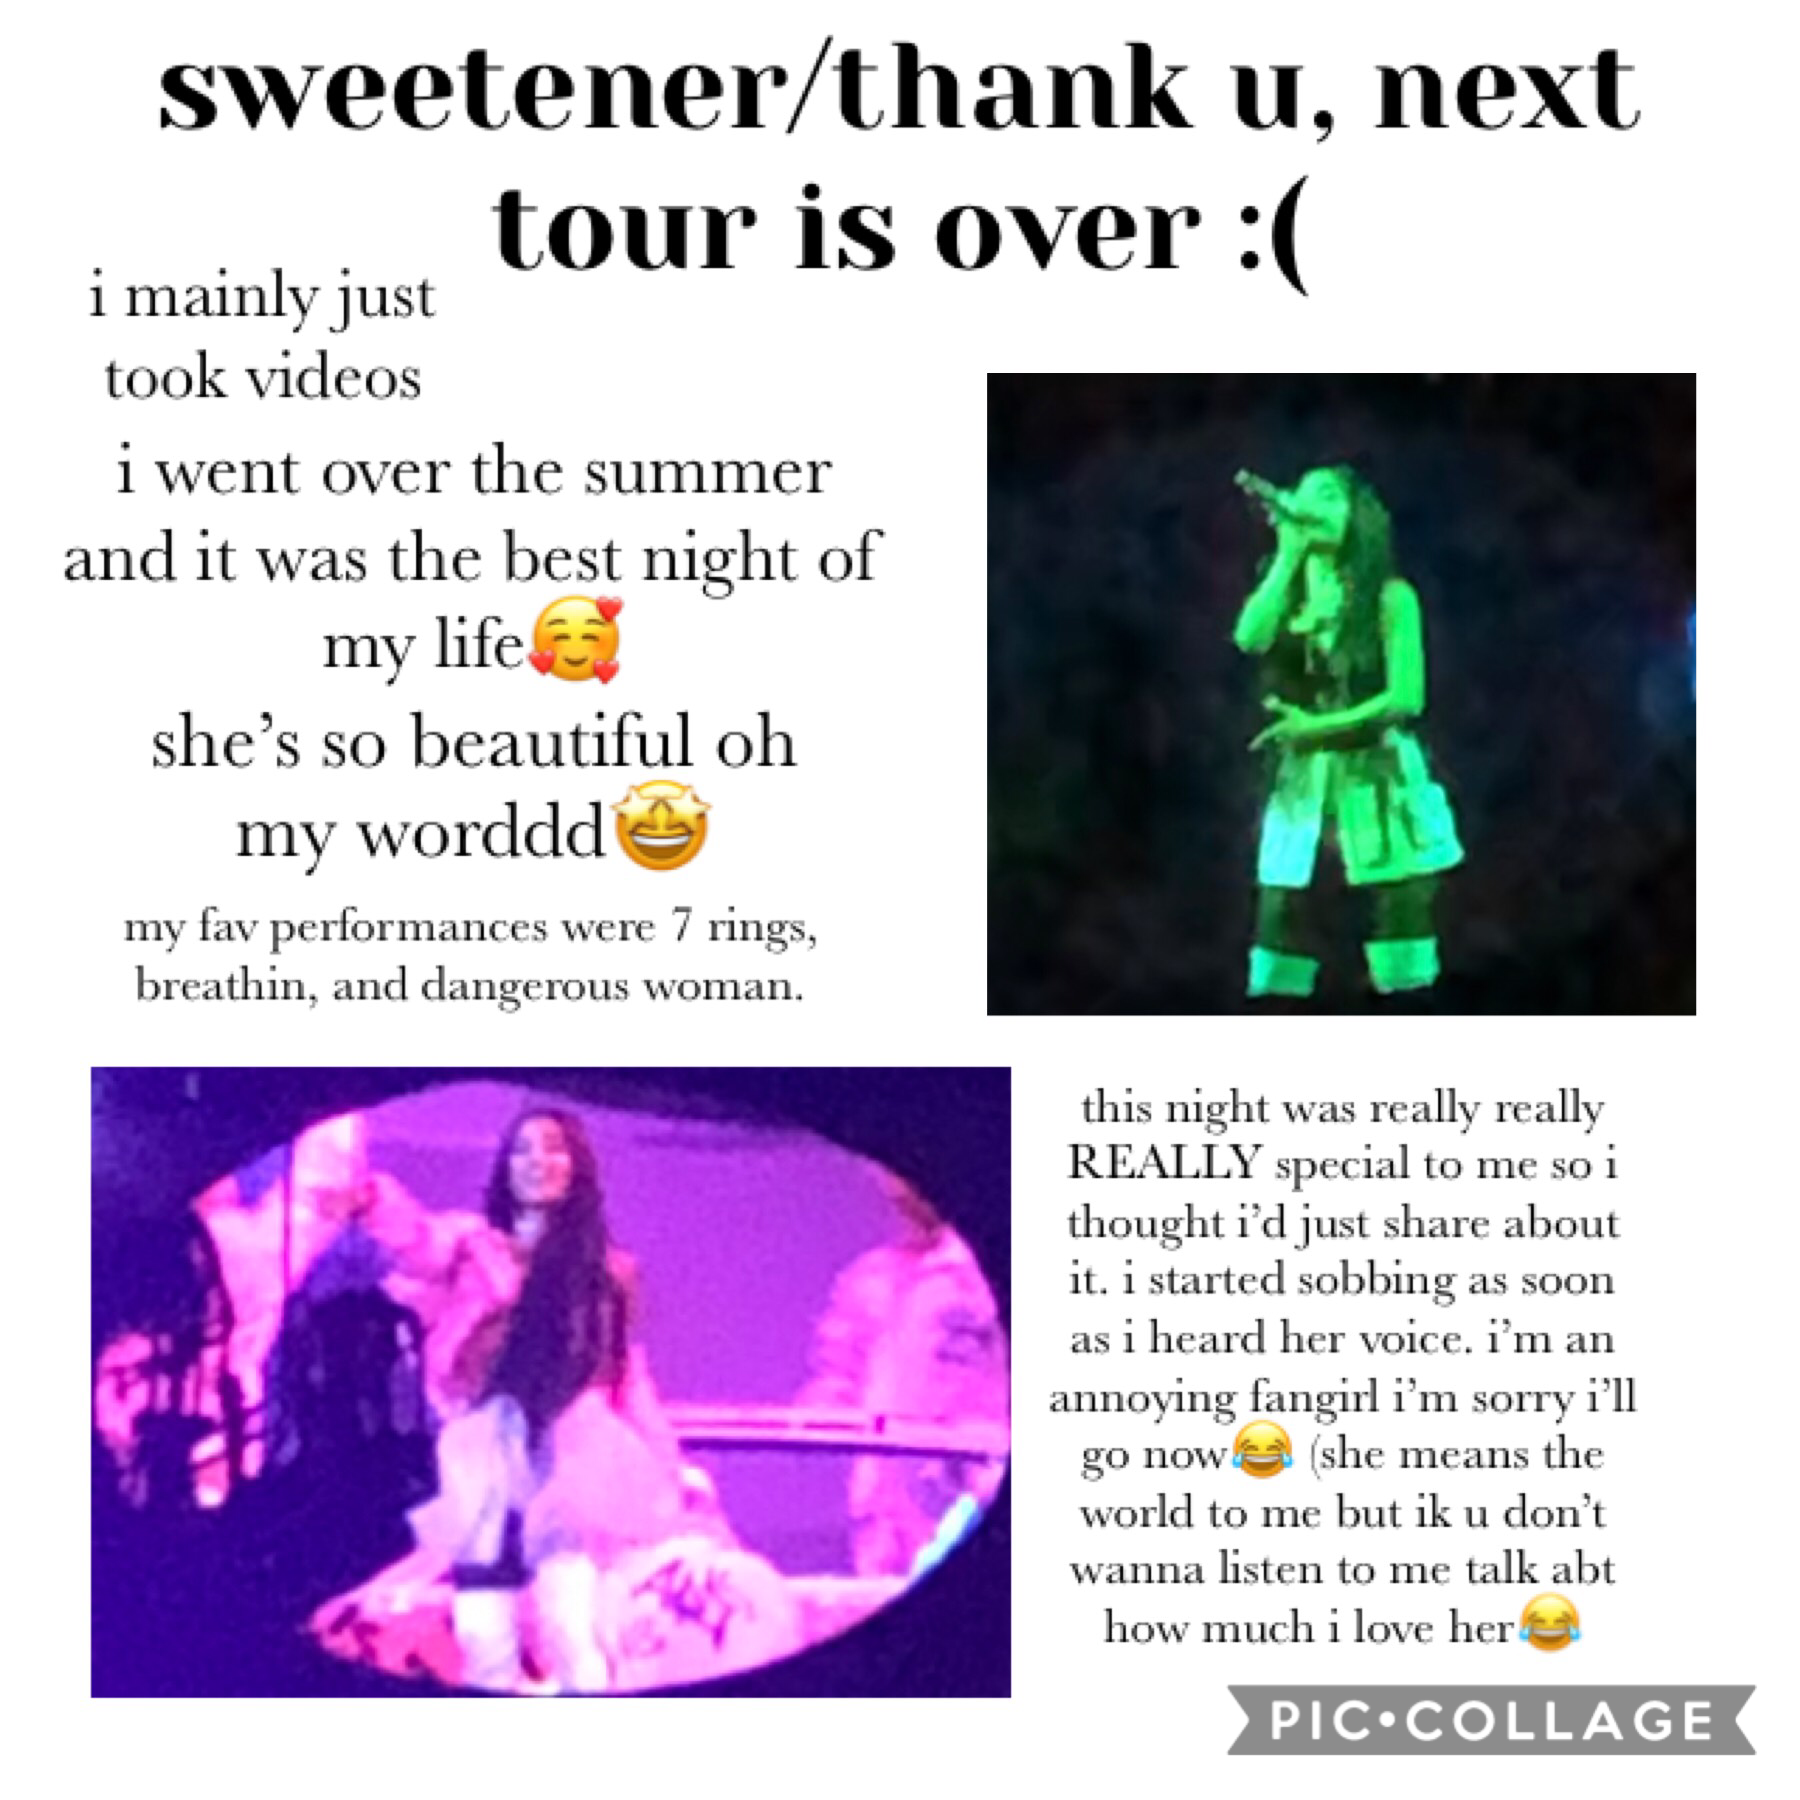 HER LIVE ALBUM IS OUT NOW (tap) 
this was literally the best night of my life. 
sorry for the terrible layout
i waited til tour was over so it wouldn’t give away my location :)
i probably won’t post again before christmas so merry christmas!!♥️
her live a